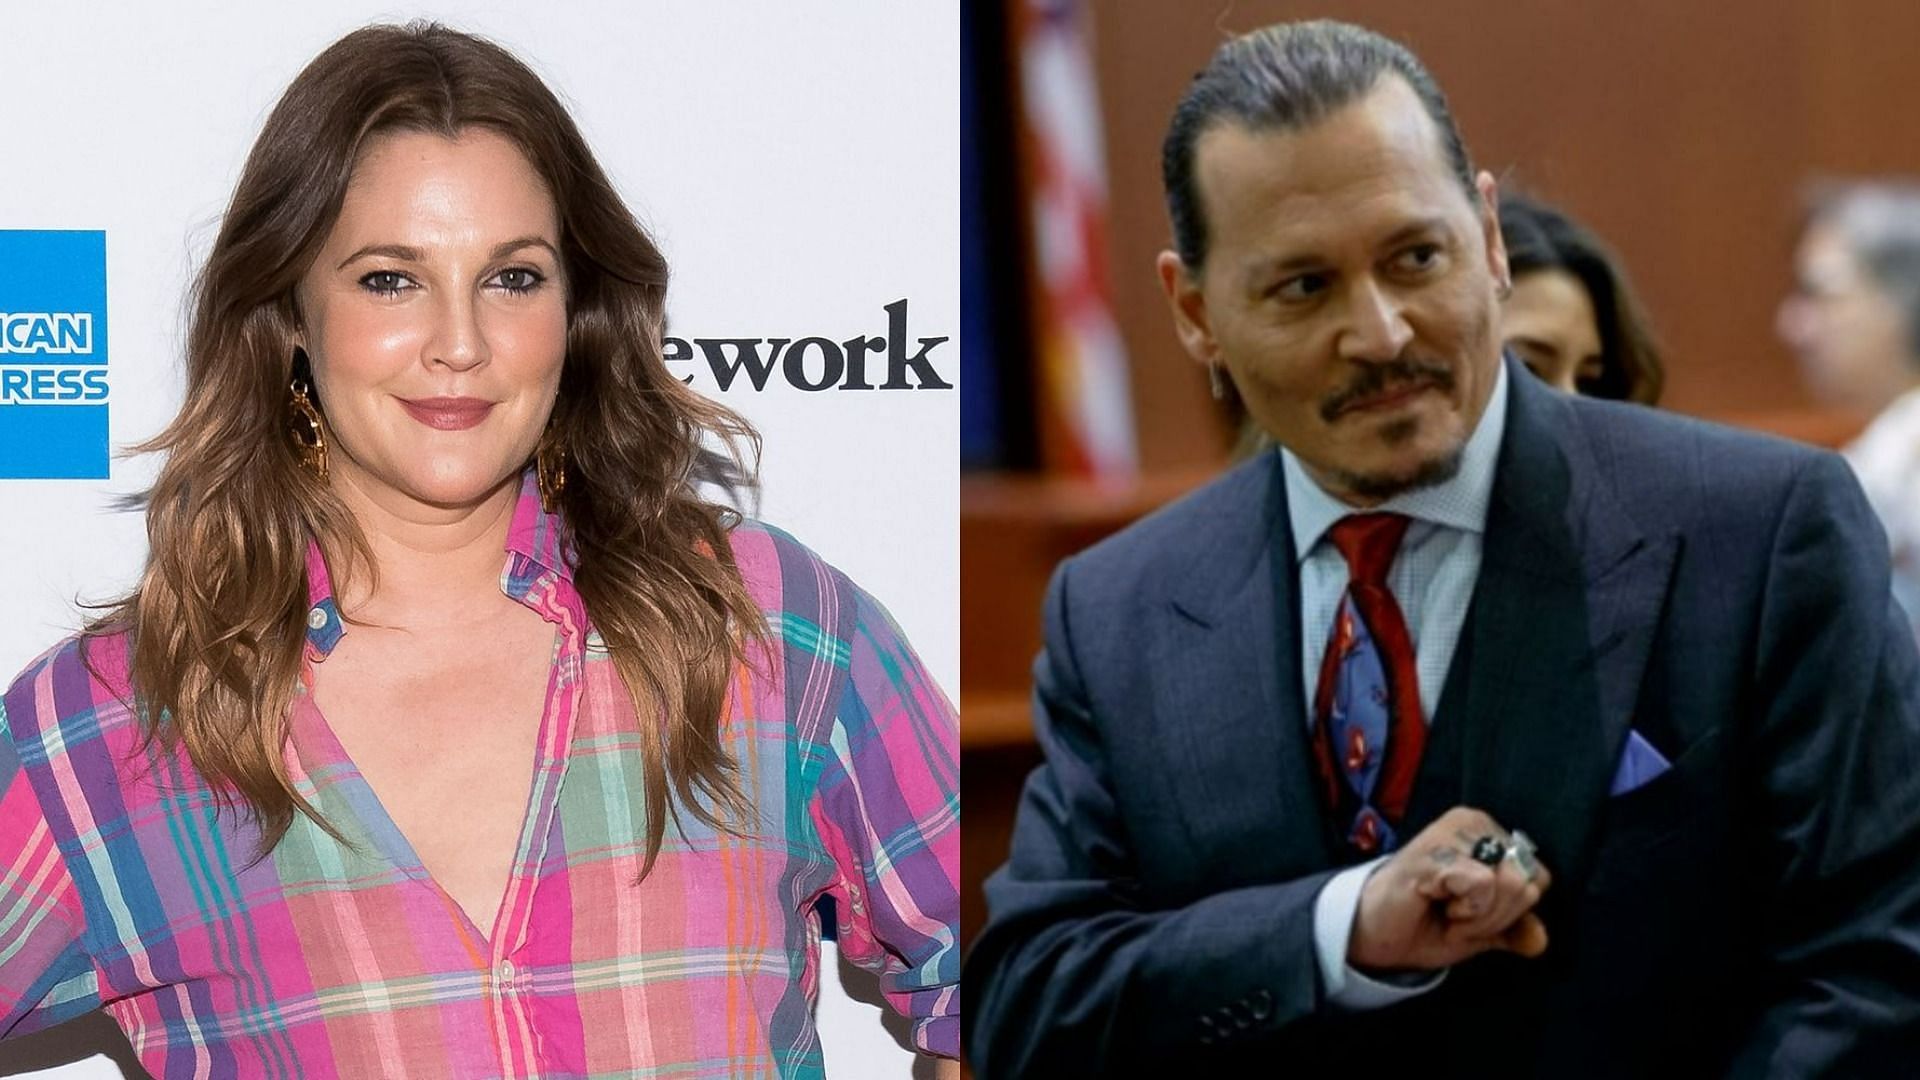 Drew Barrymore issued an apology over comments on Johnny Depp-Amber Heard legal battle (Image via Mike Pont/Getty Images and Reuters)